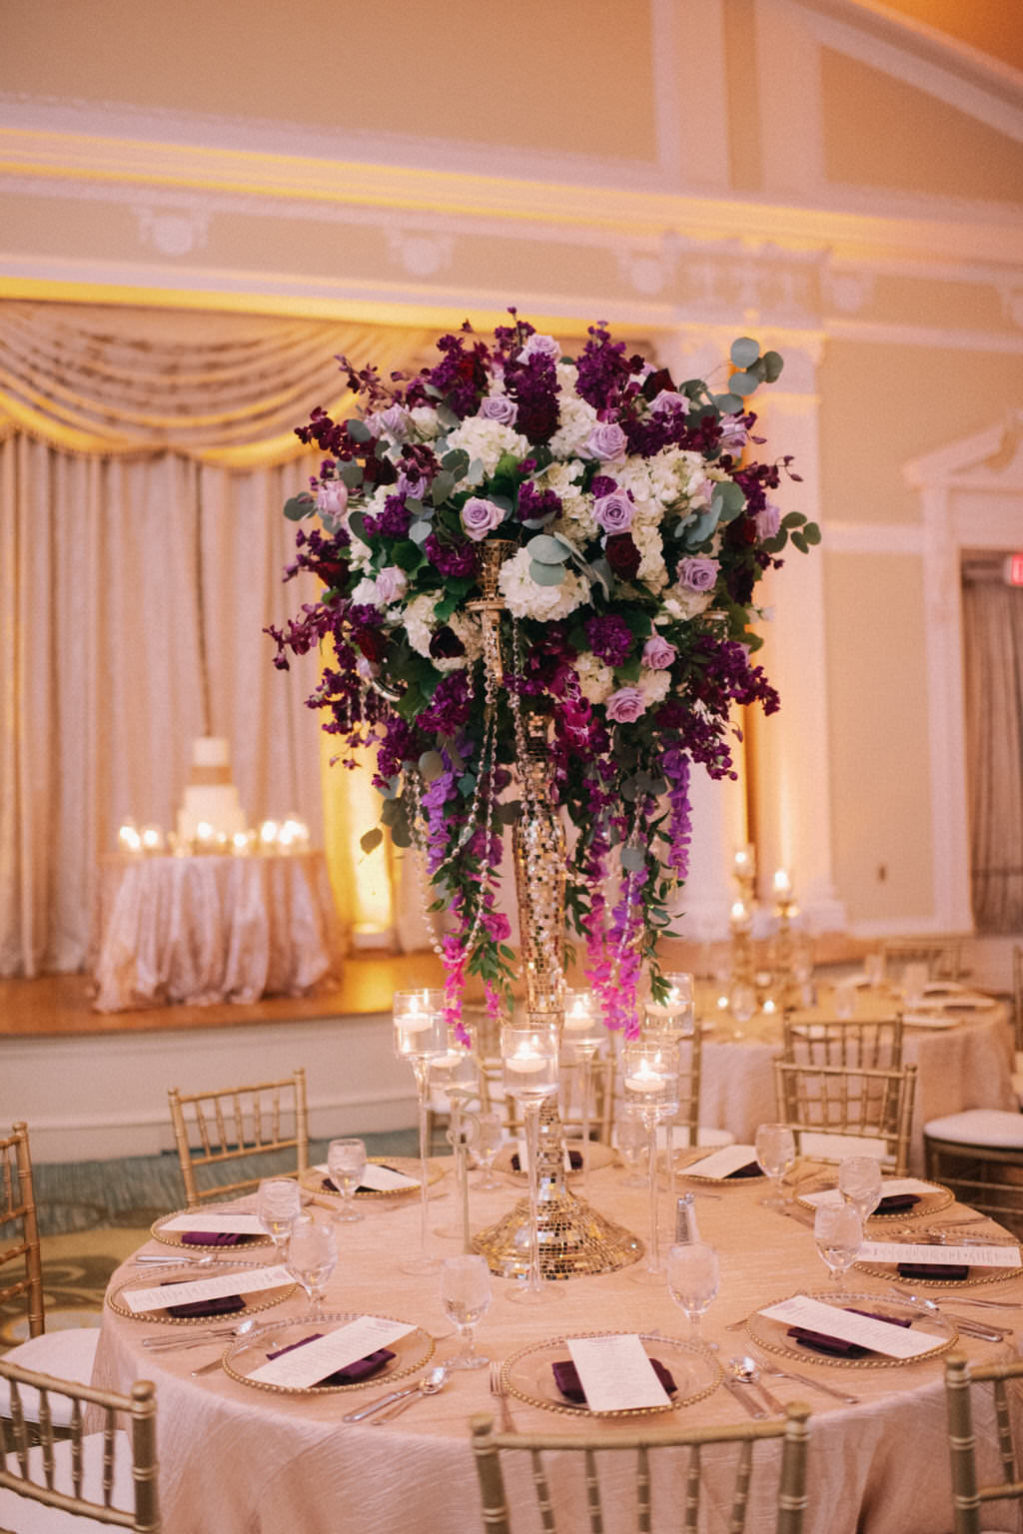 Elegant and Luxurious Wedding Reception Decor Portrait, Round Table with Gold Linen, Tall Purple, Plum, Lilac, Ivory and Hanging Amaranthus and Draped Crystals Floral Centerpiece